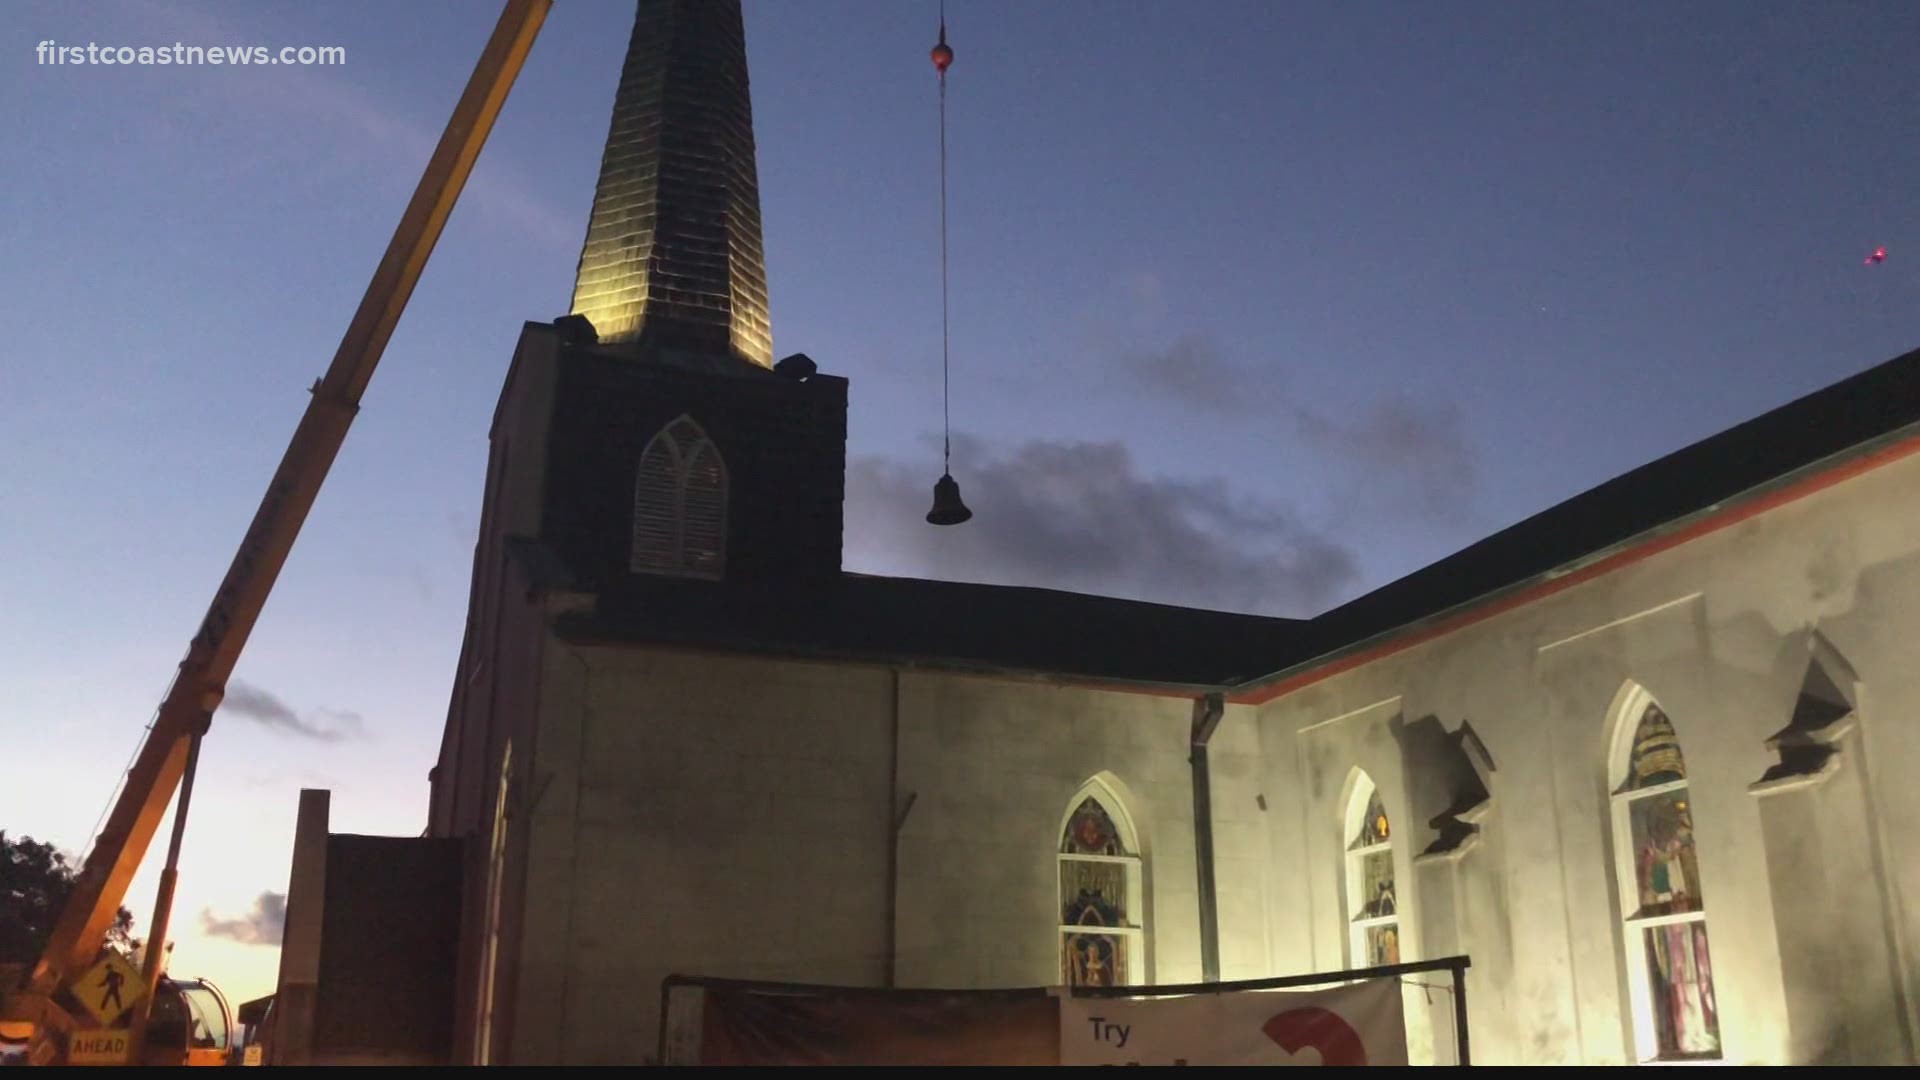 The church bell at Trinity Parish, the first Protestant church in Florida, was restored in Cincinnati. It will be rung on the church's 200th birthday.